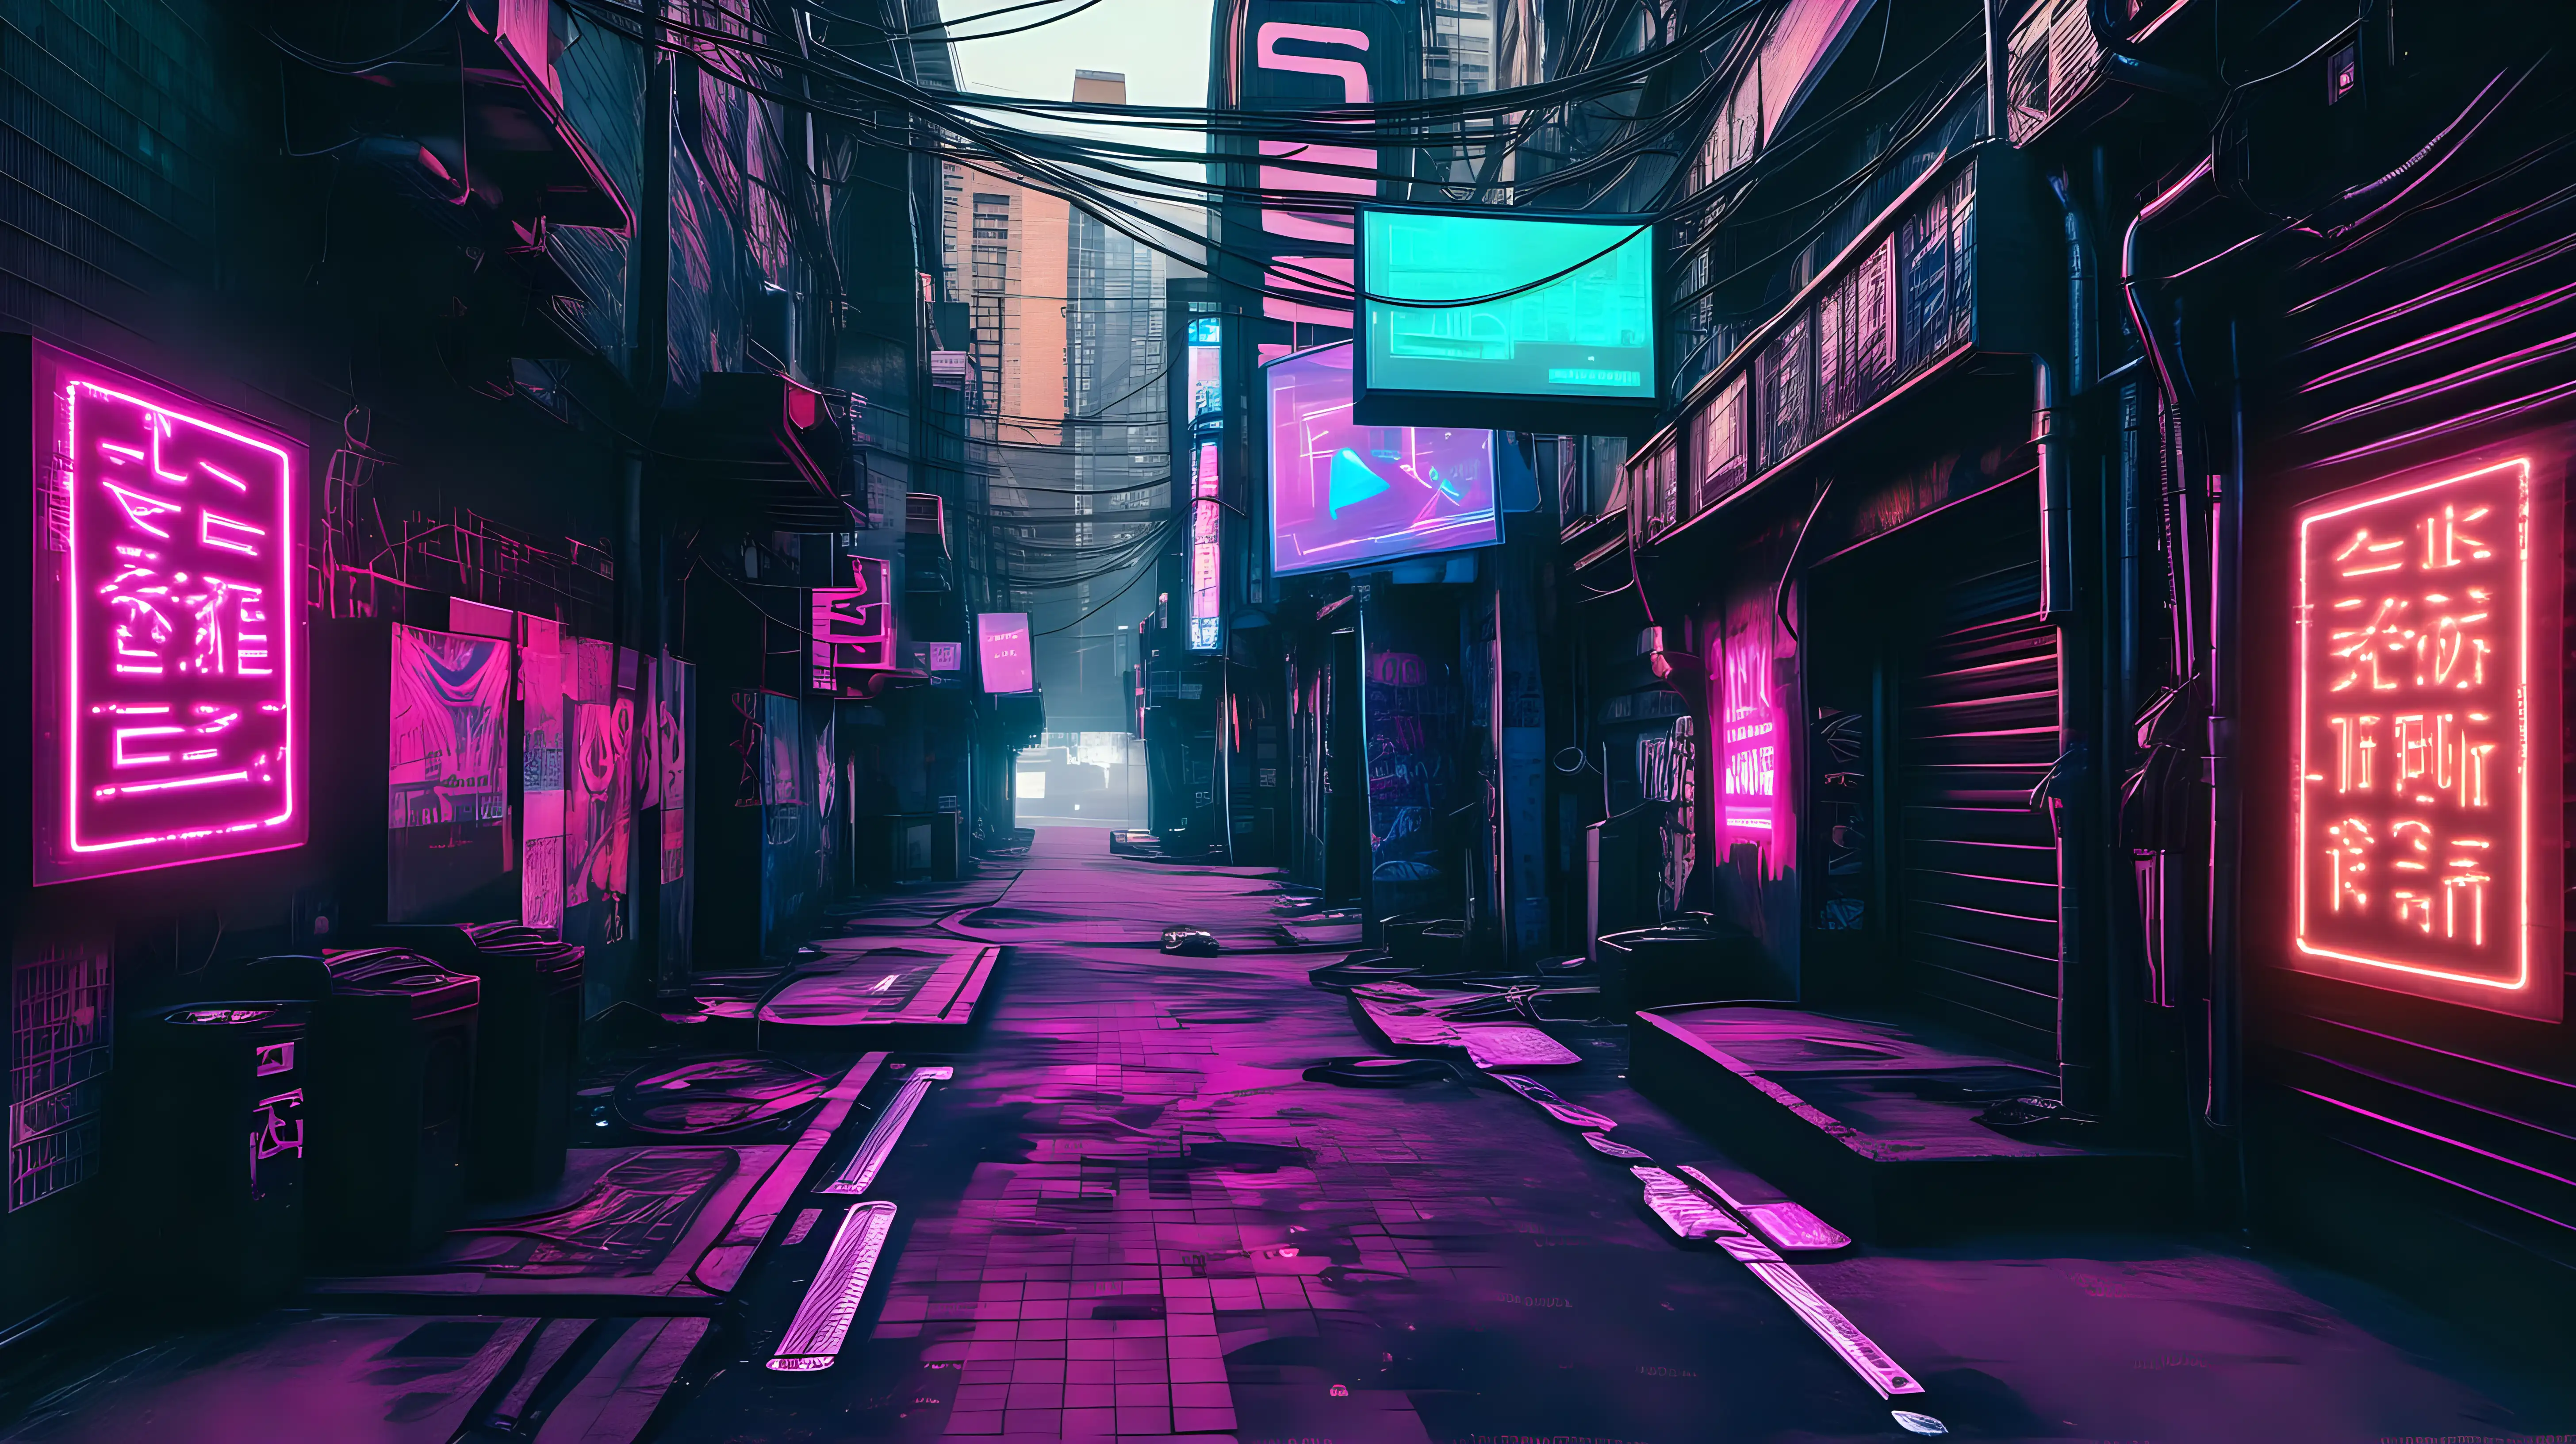 Cyberpunk alleyway with holographic signs.